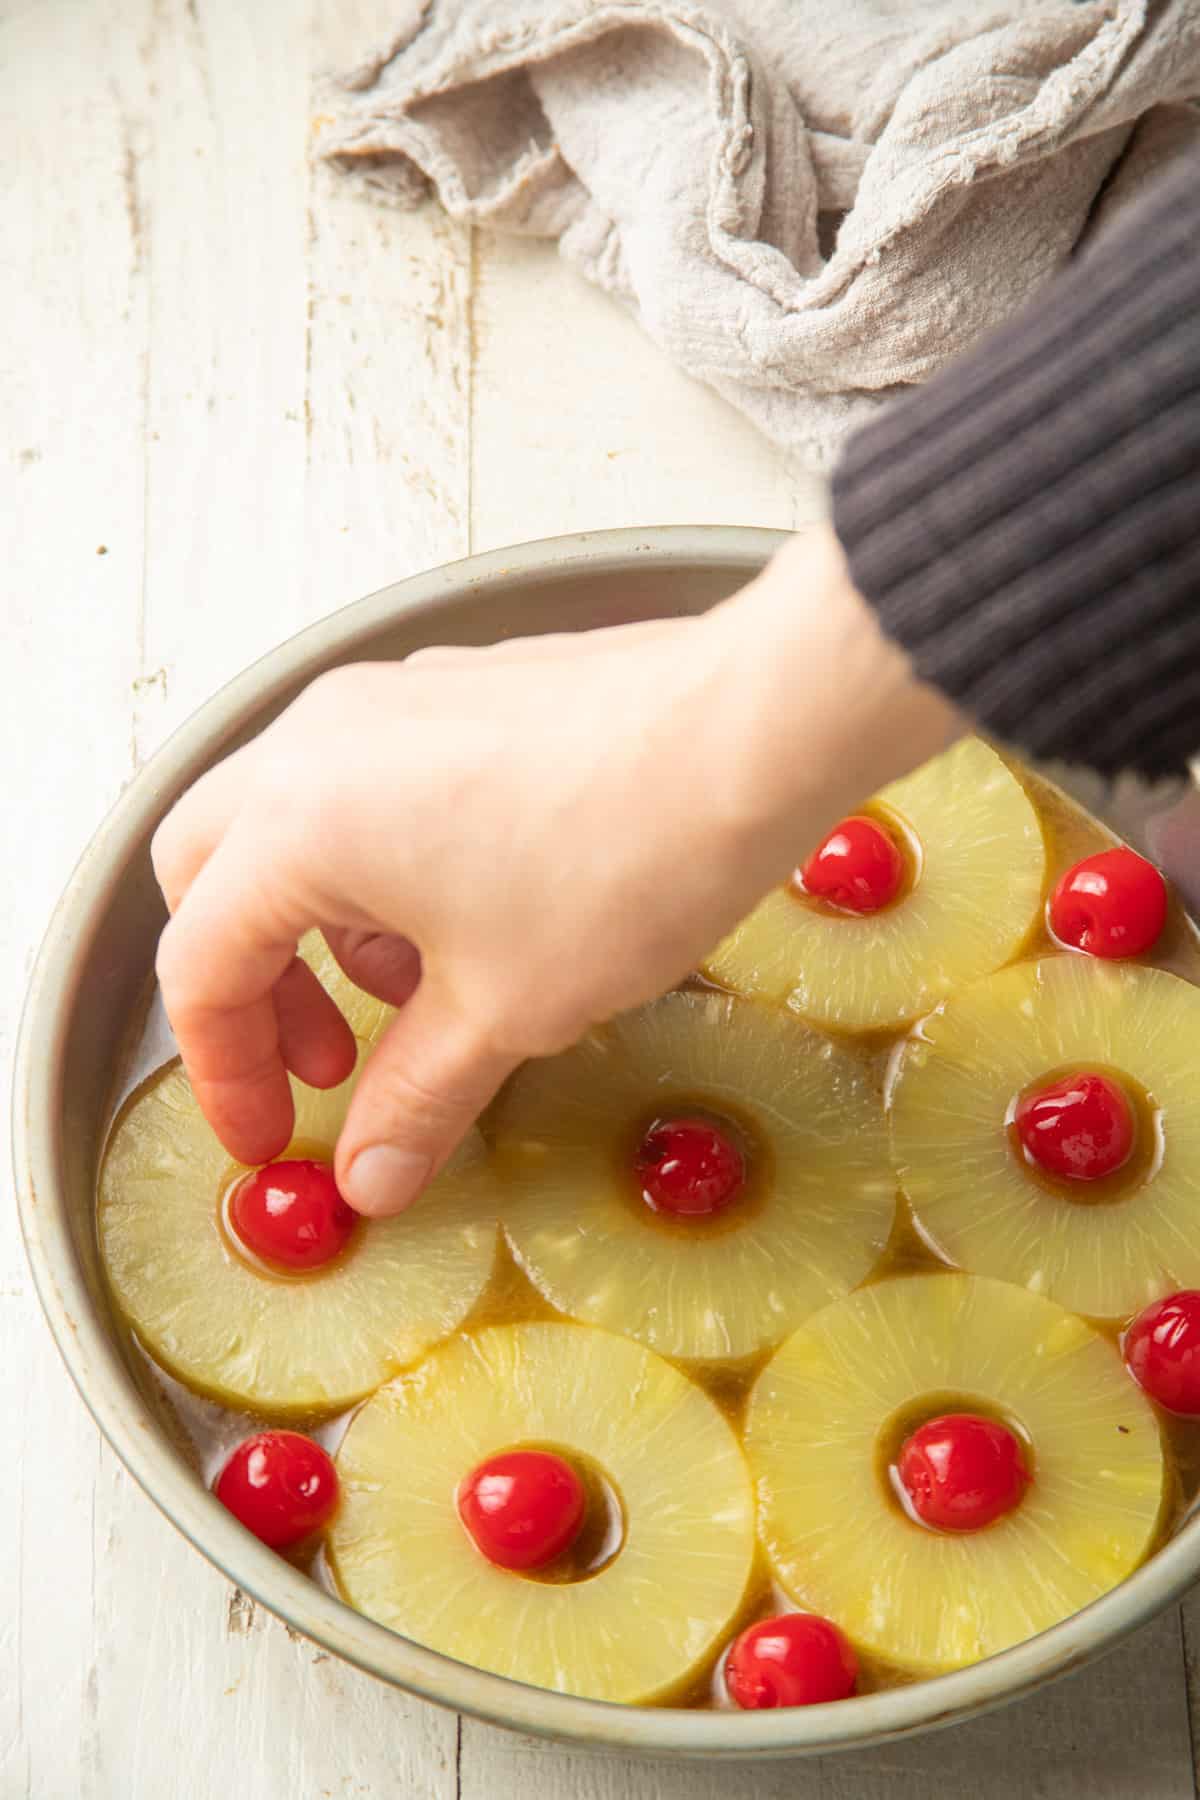 Hand arranging pineapple slices and cherries in a cake dish.